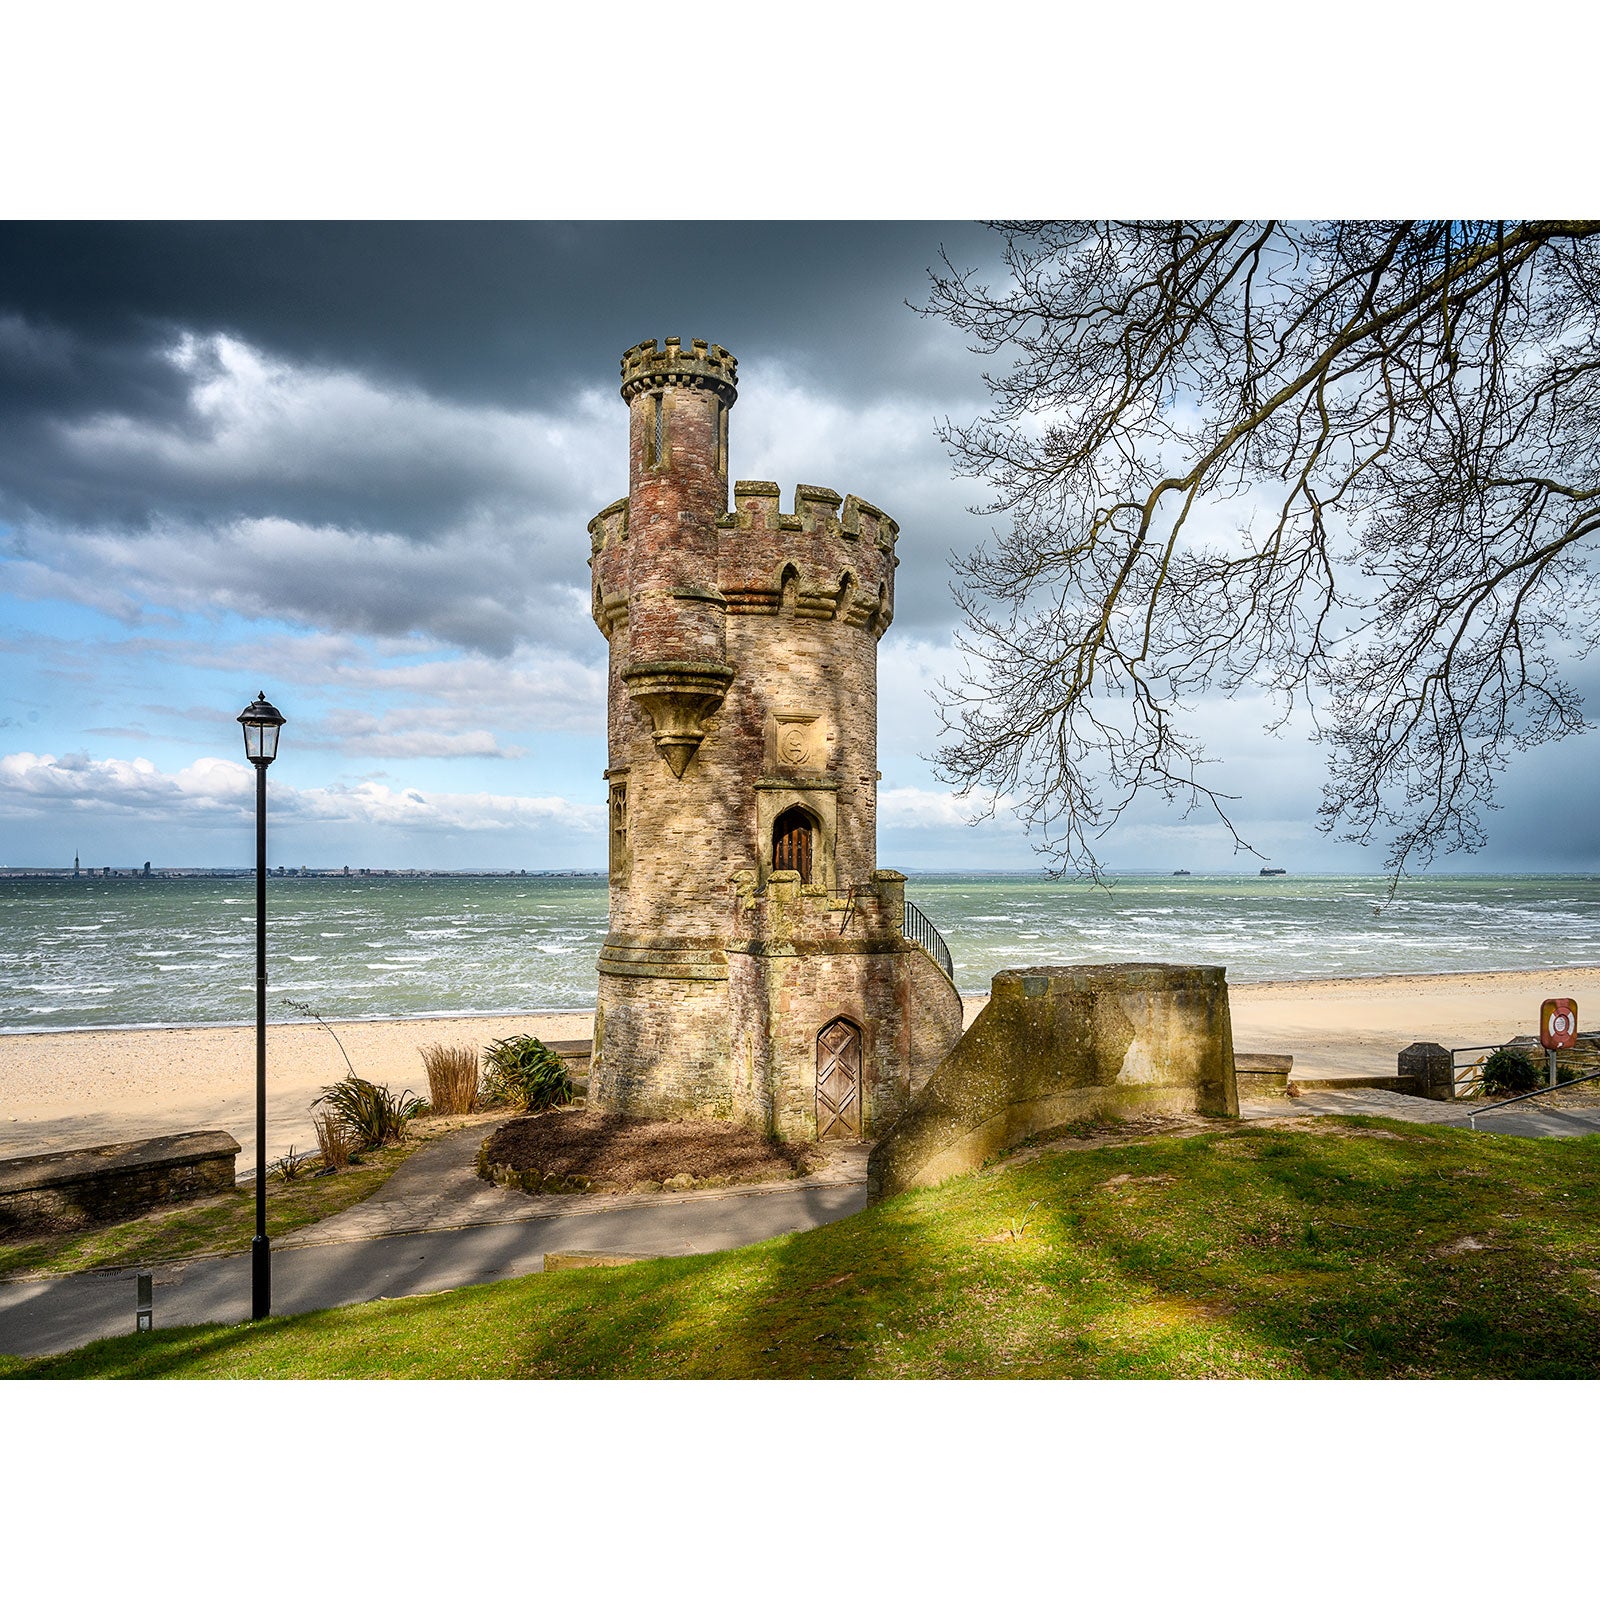 Historic Appley Tower along a coastal shoreline on the Isle of Wight under a cloudy sky, captured by Available Light Photography.